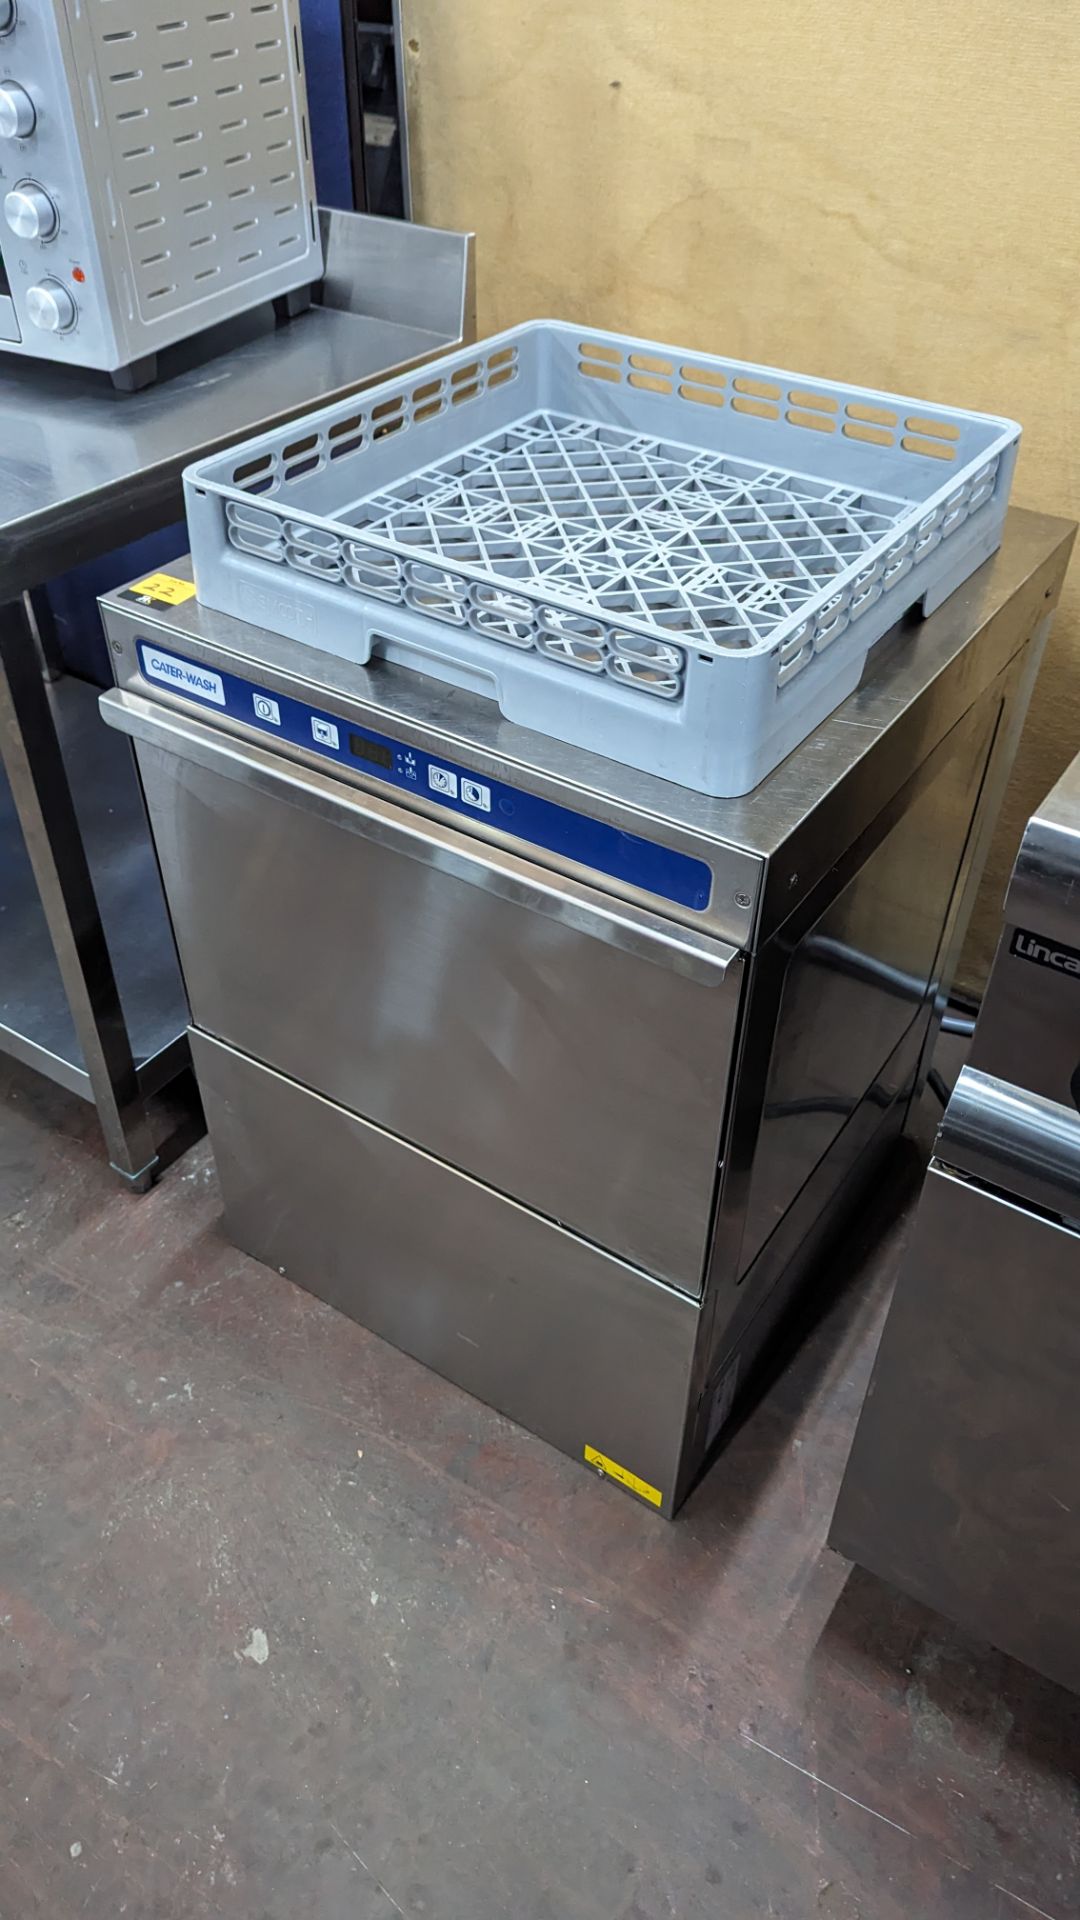 Cater-Wash stainless steel commercial dishwasher including a total of 3 trays